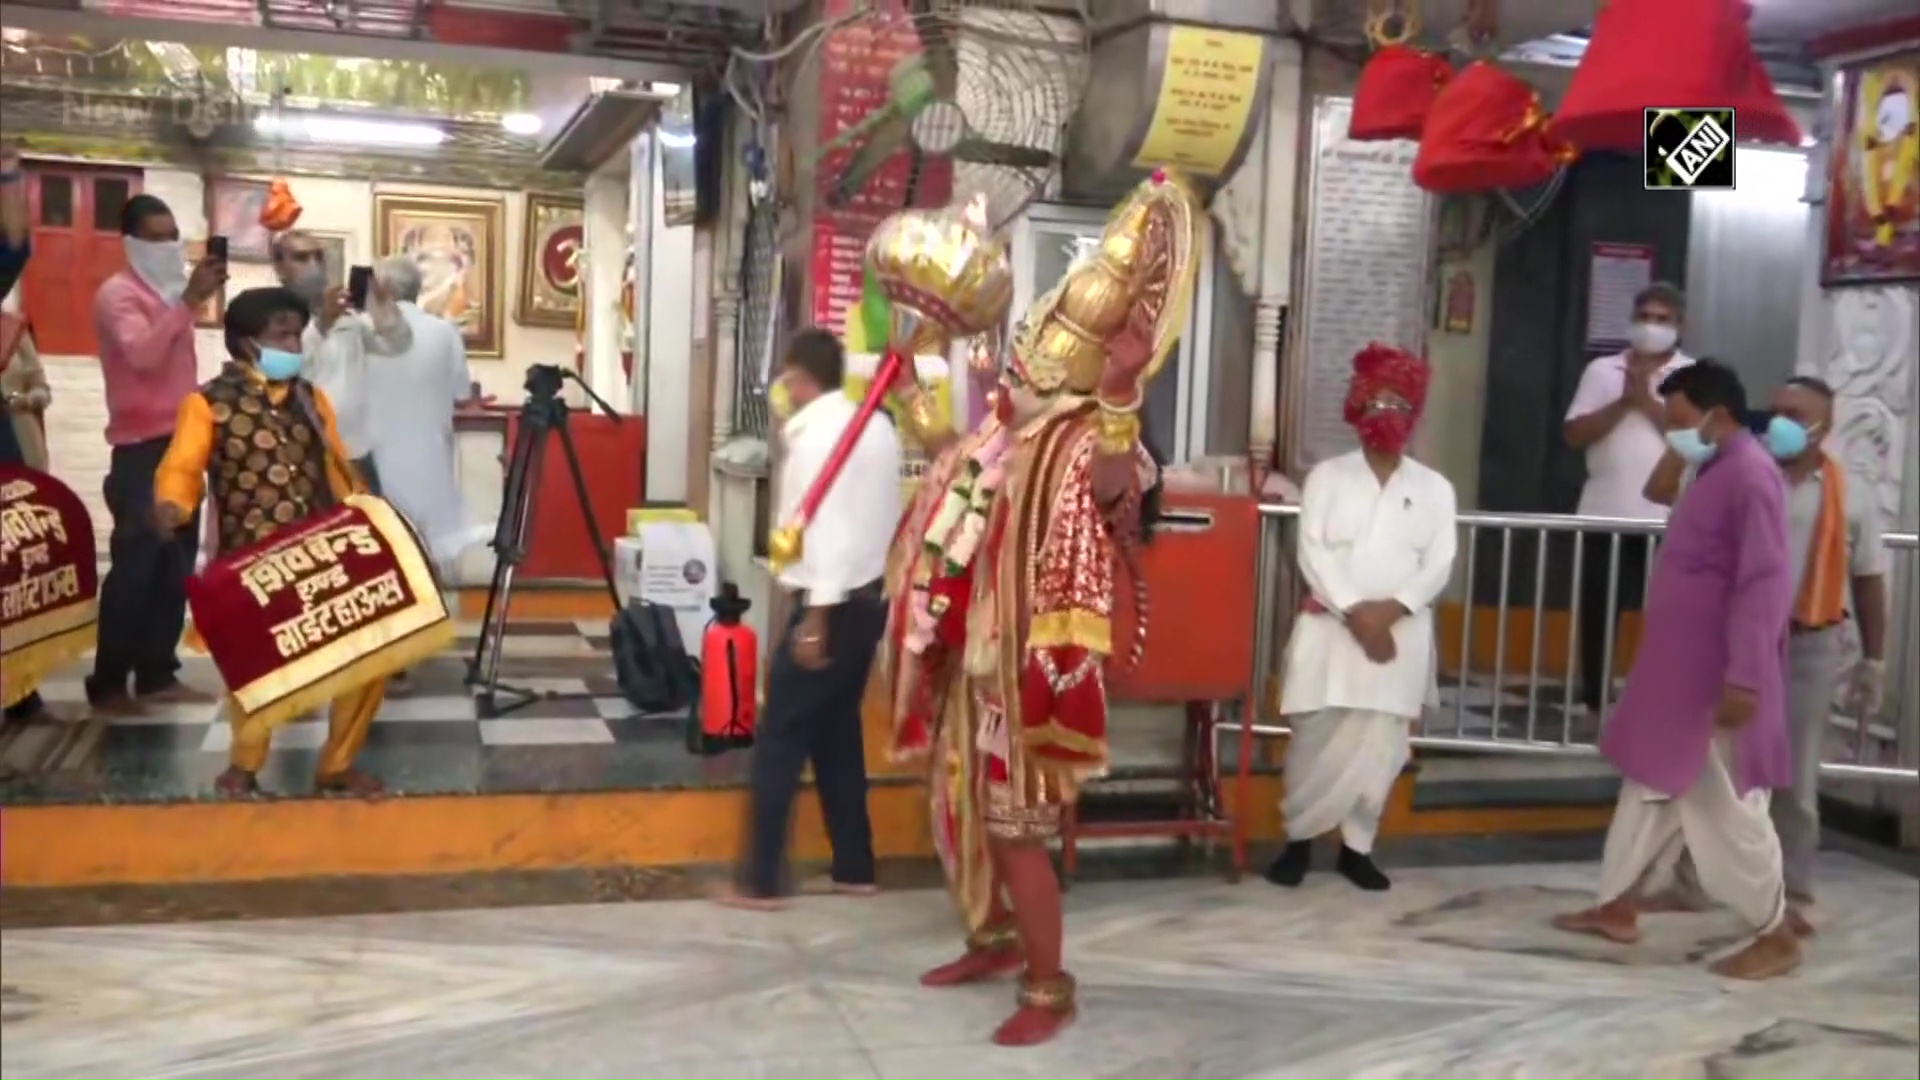 Watch: ‘Hanuman’ dances to the tune of Dhol at Hanuman Temple near Connaught Place